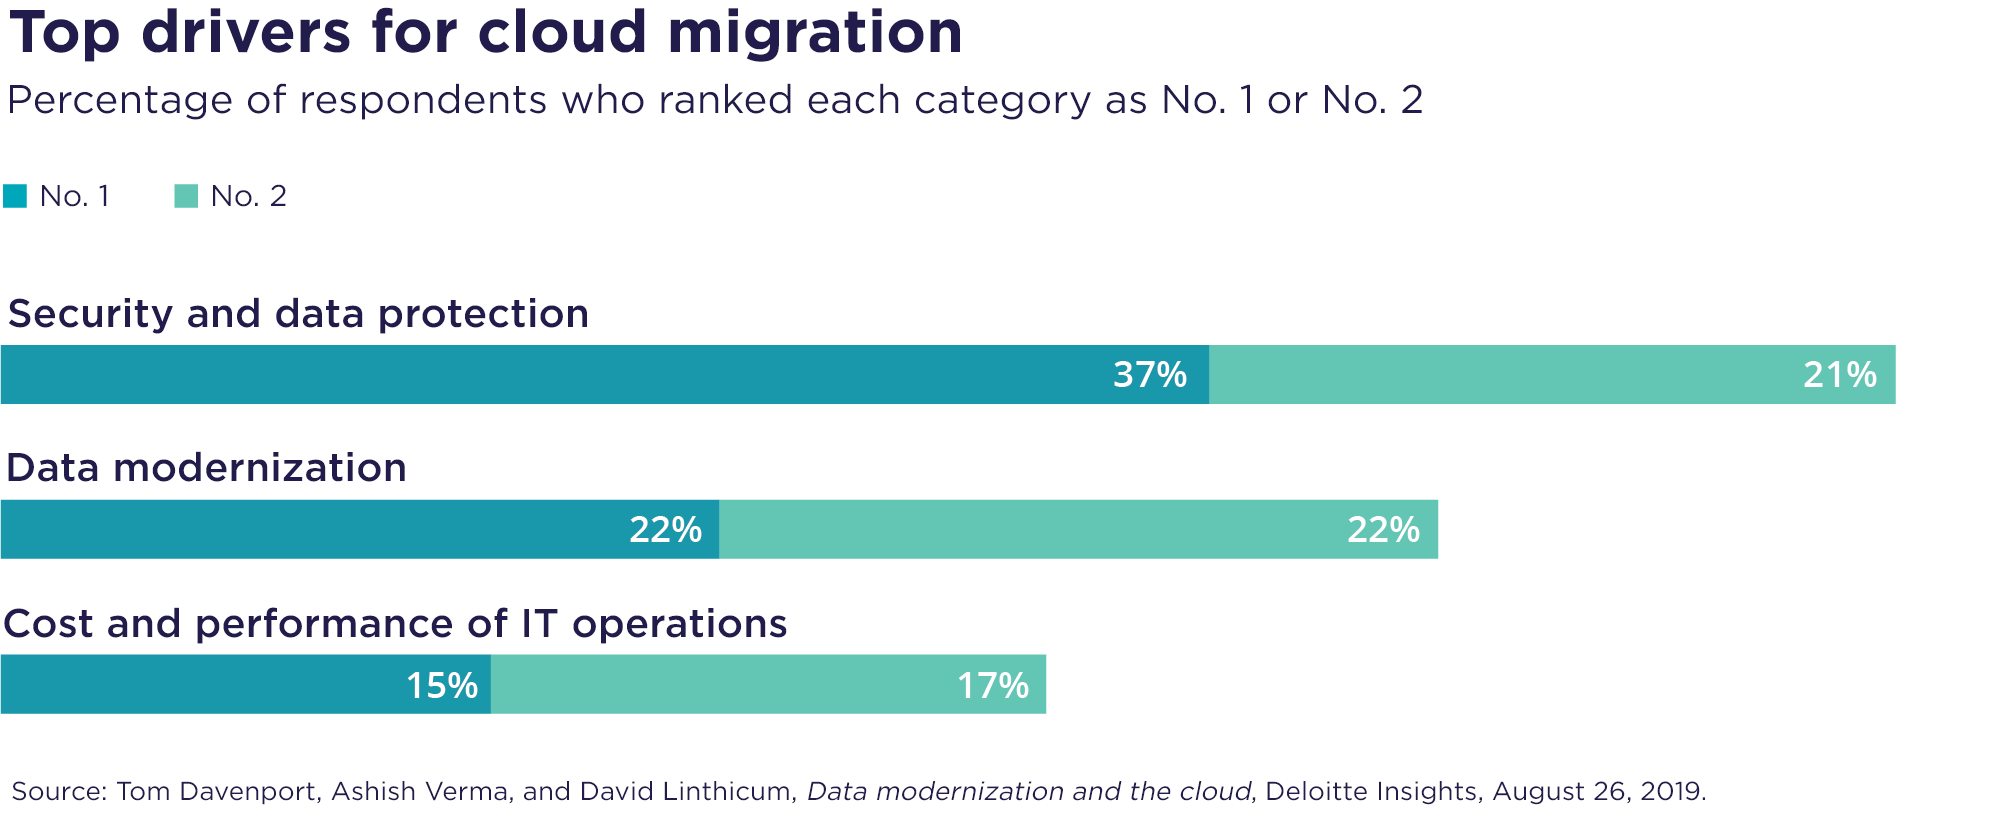 Top drivers for cloud migration